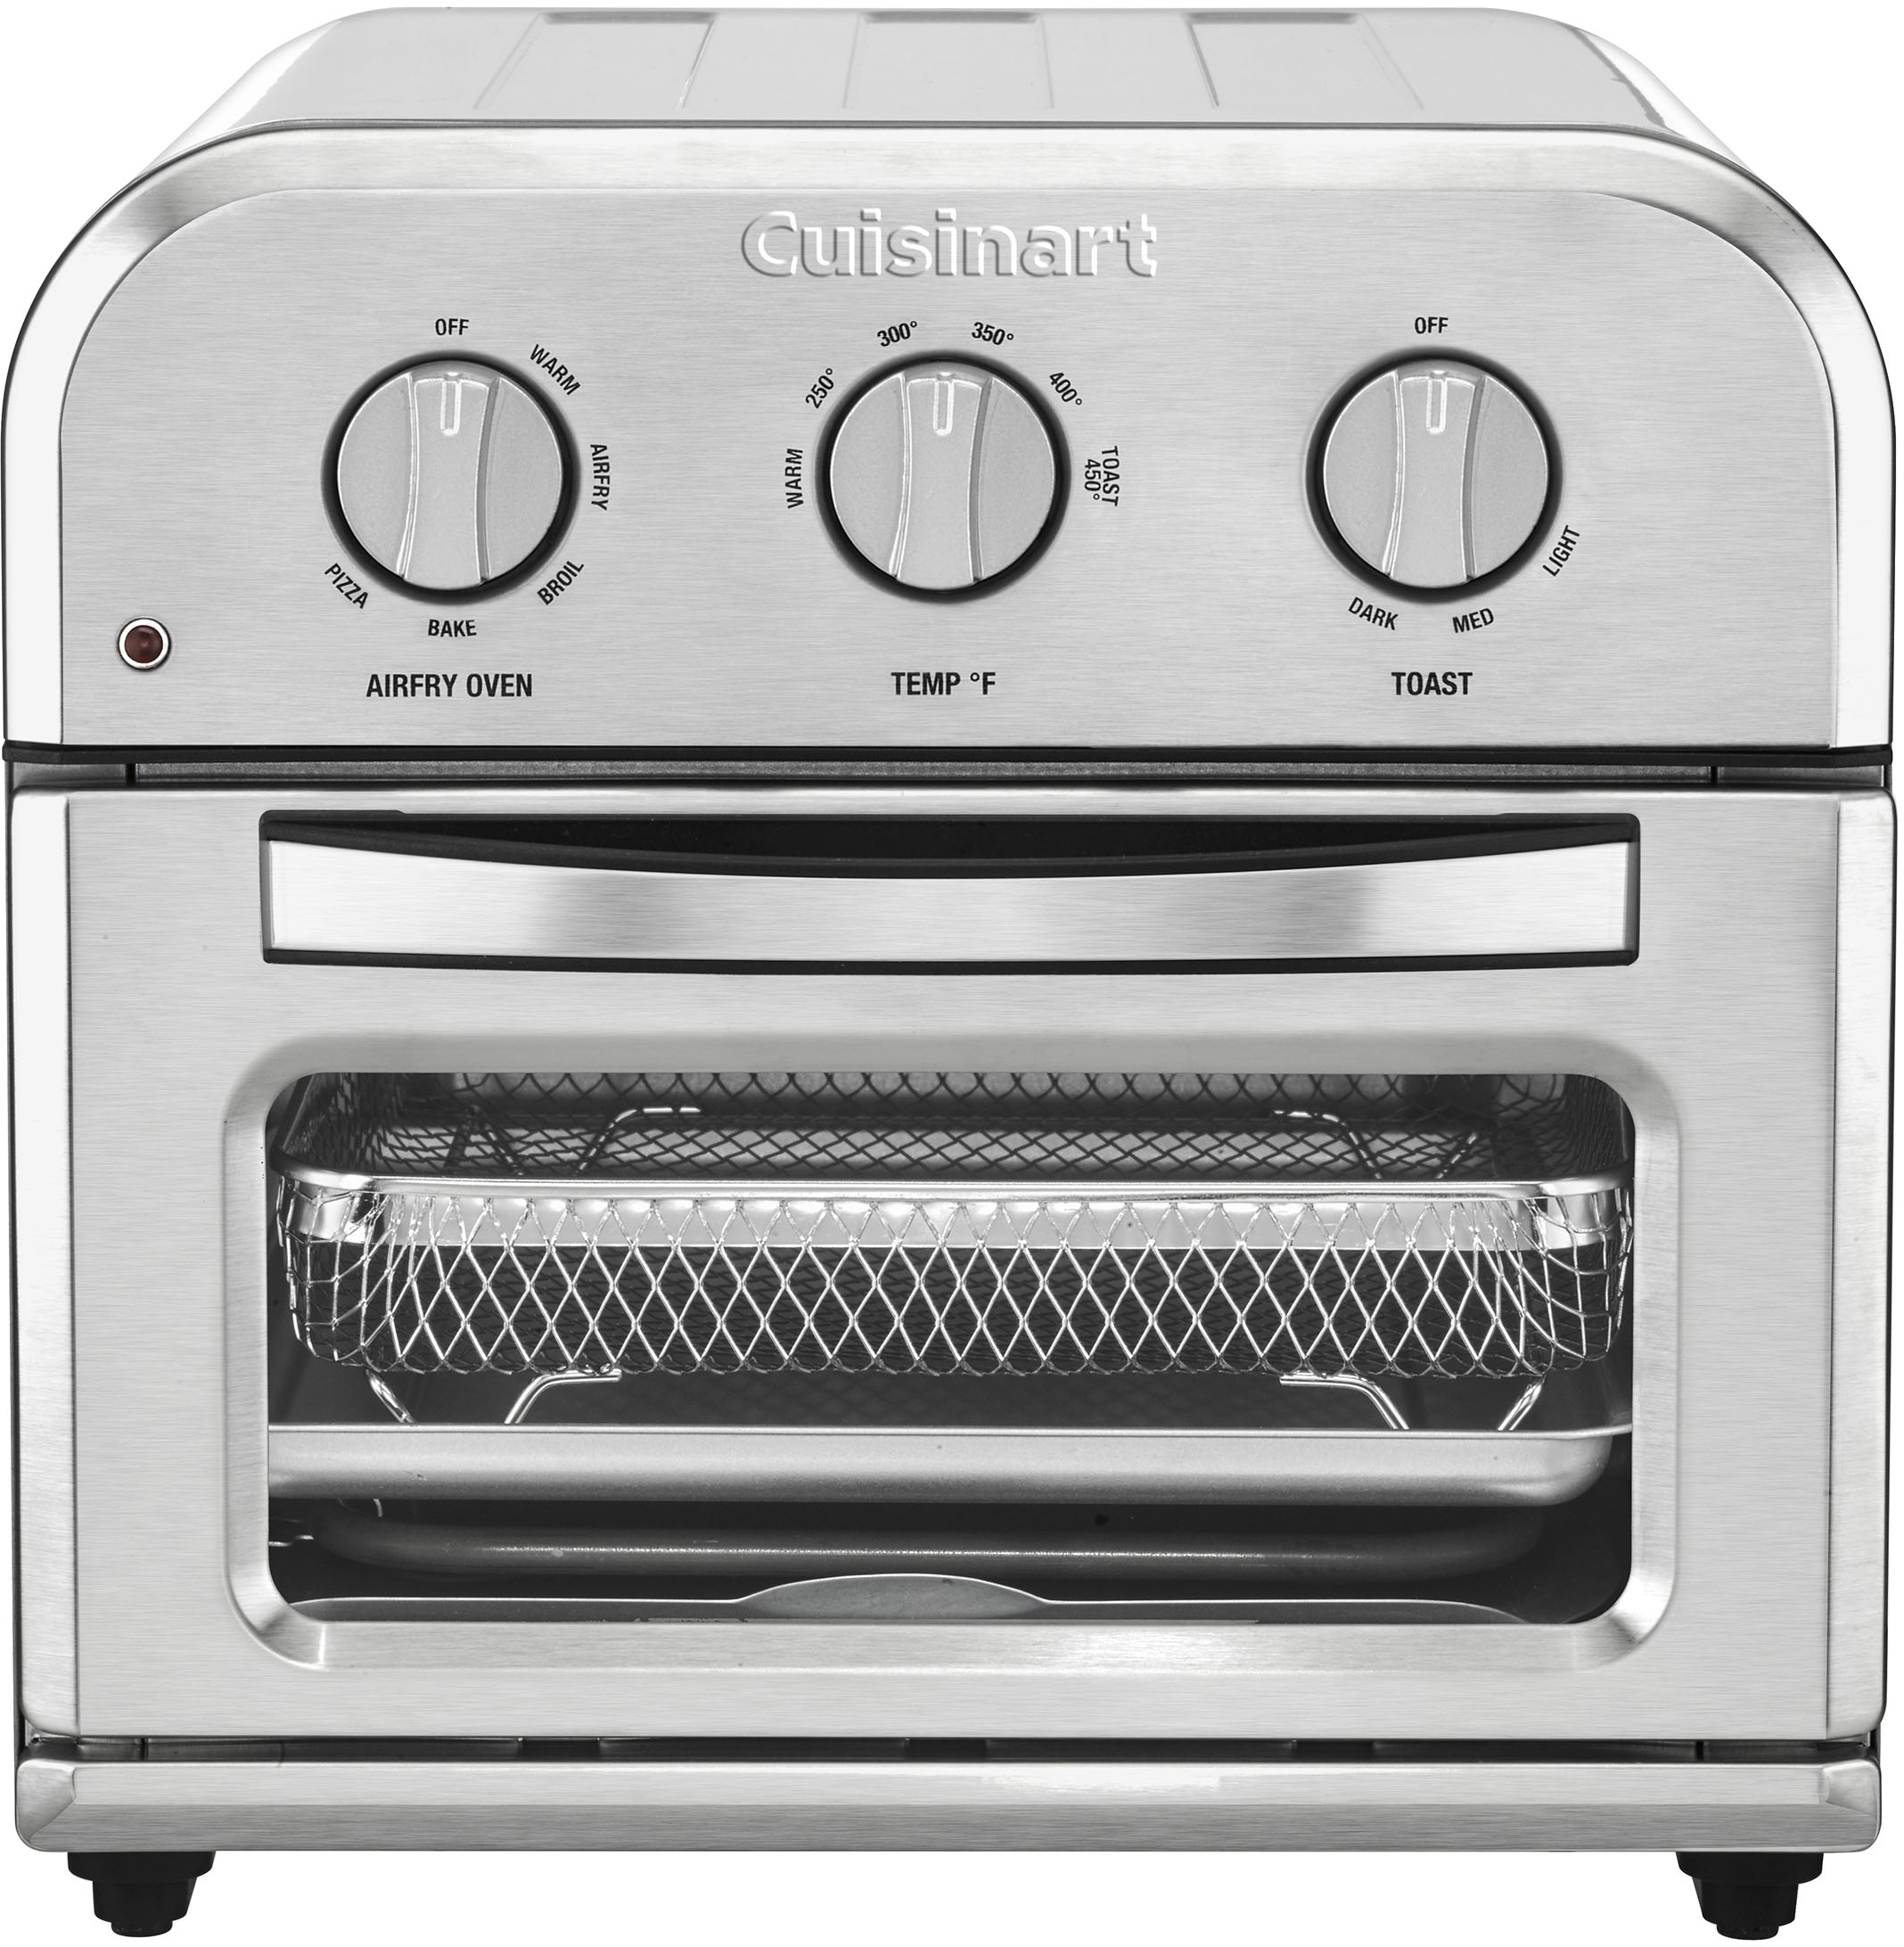 0086279188595 - CUISINART - COMPACT AIR FRYER TOASTER OVEN - STAINLESS STEEL